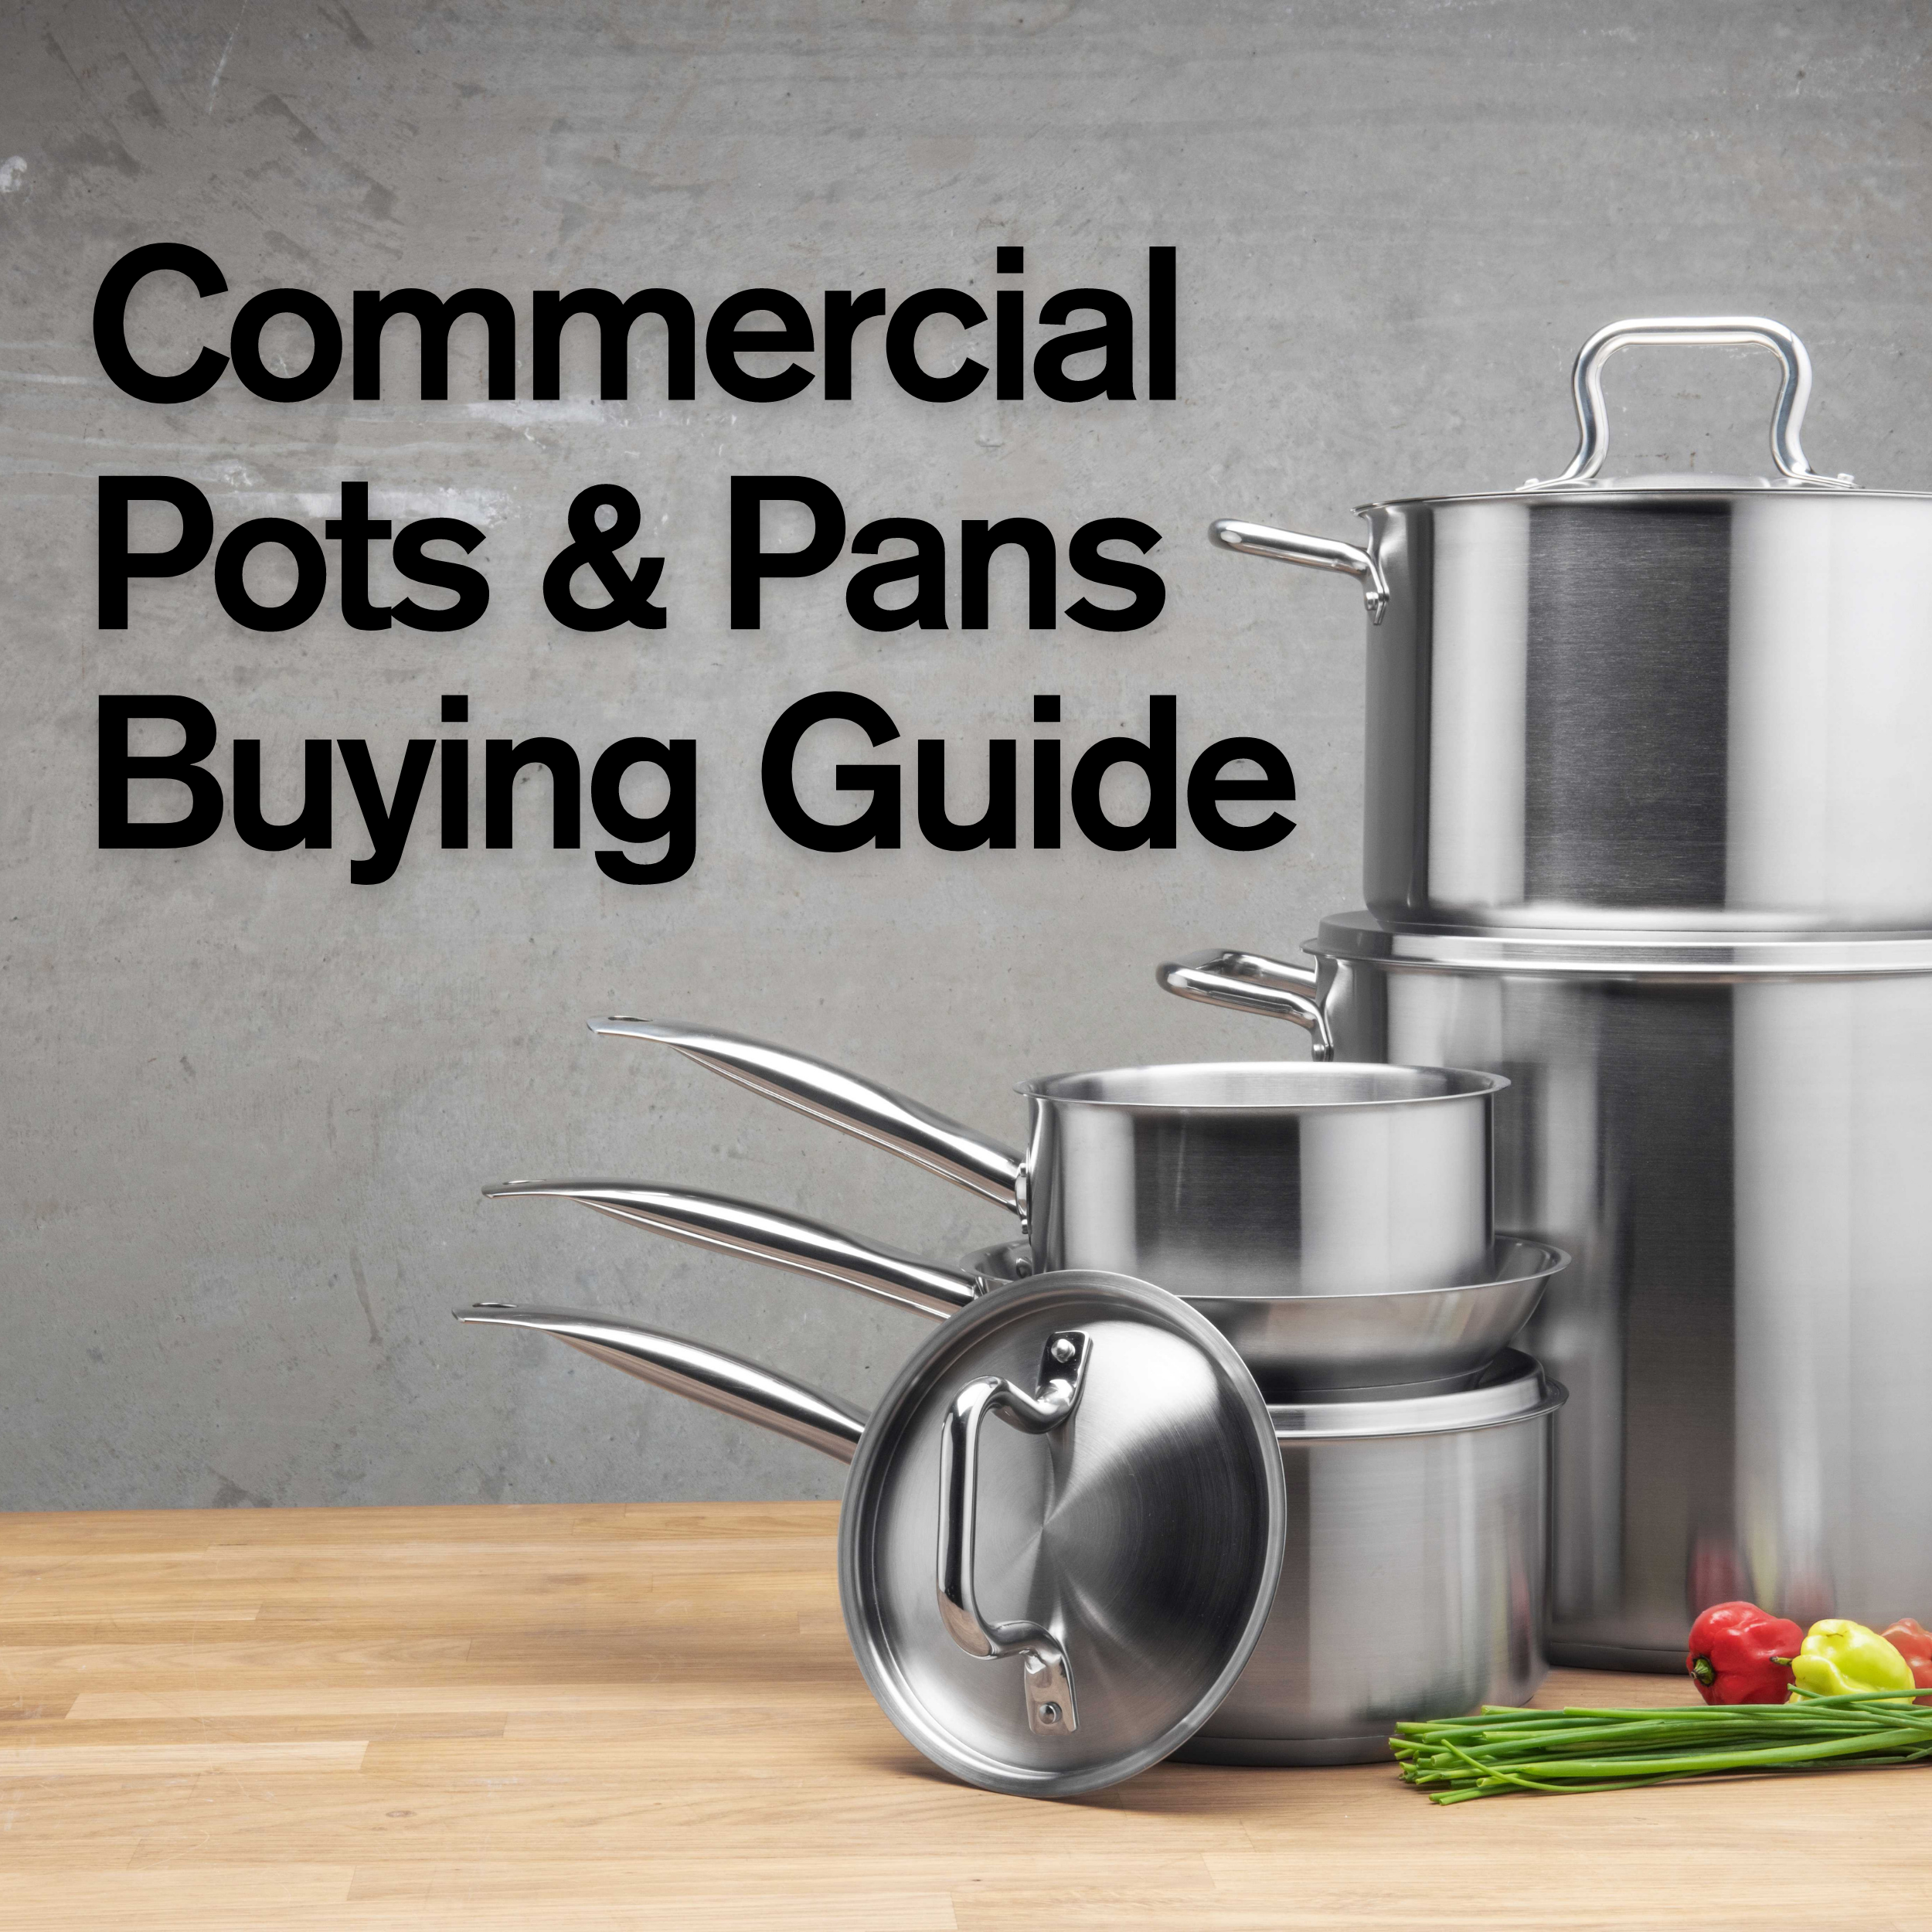 Stainless Steel Cookware Comparison Guide